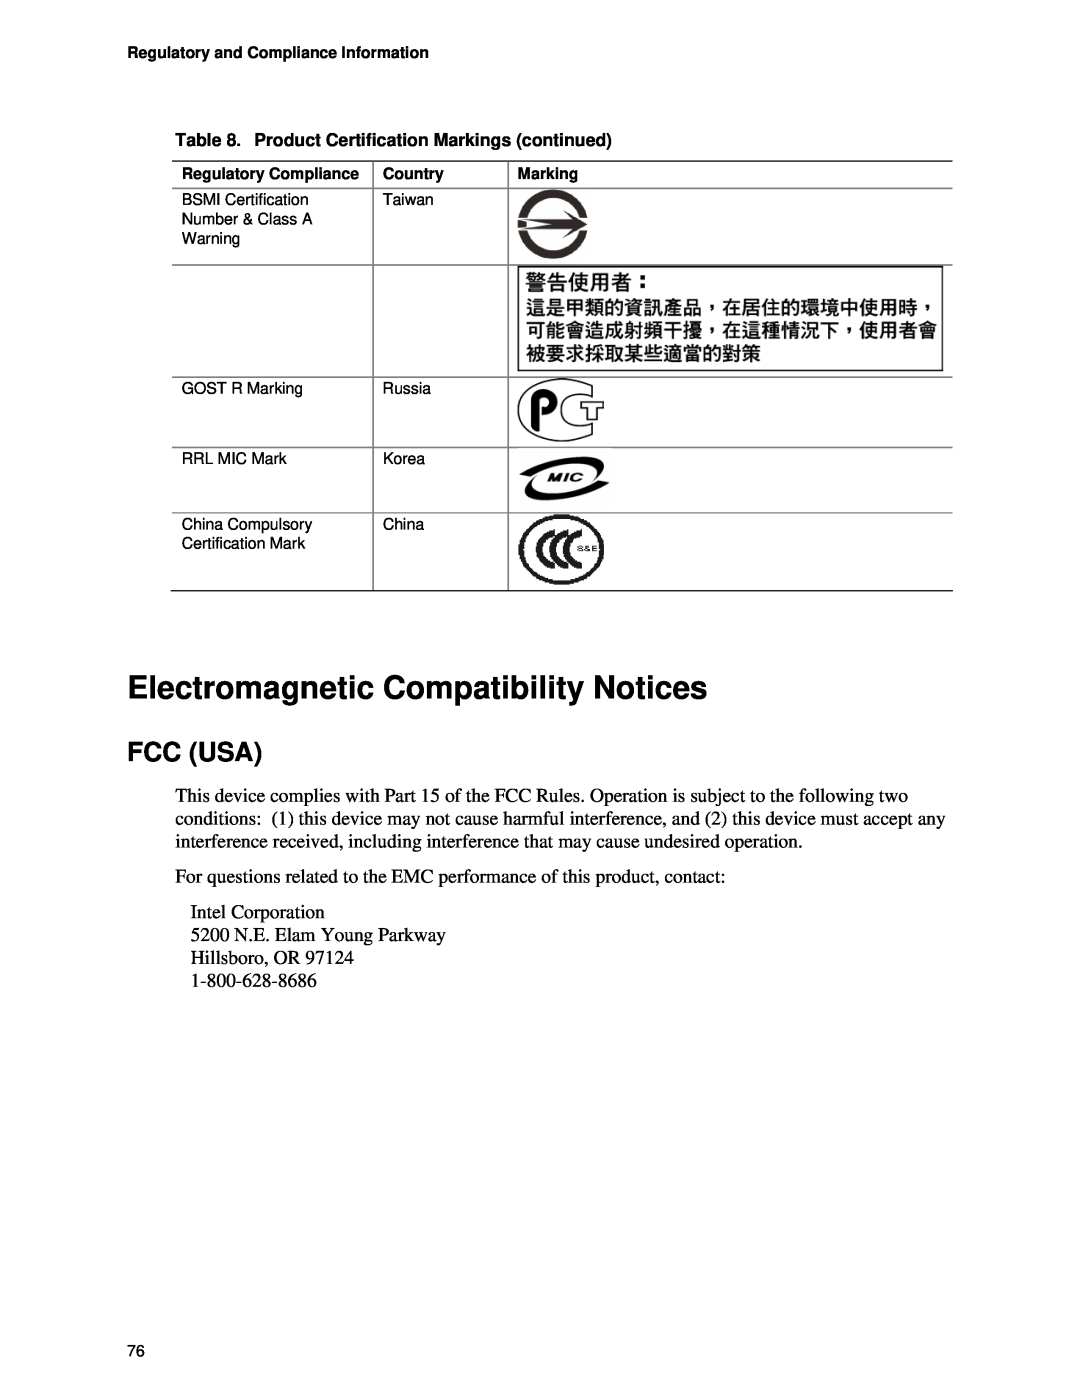 Intel SR1450 manual Electromagnetic Compatibility Notices, Fcc Usa 